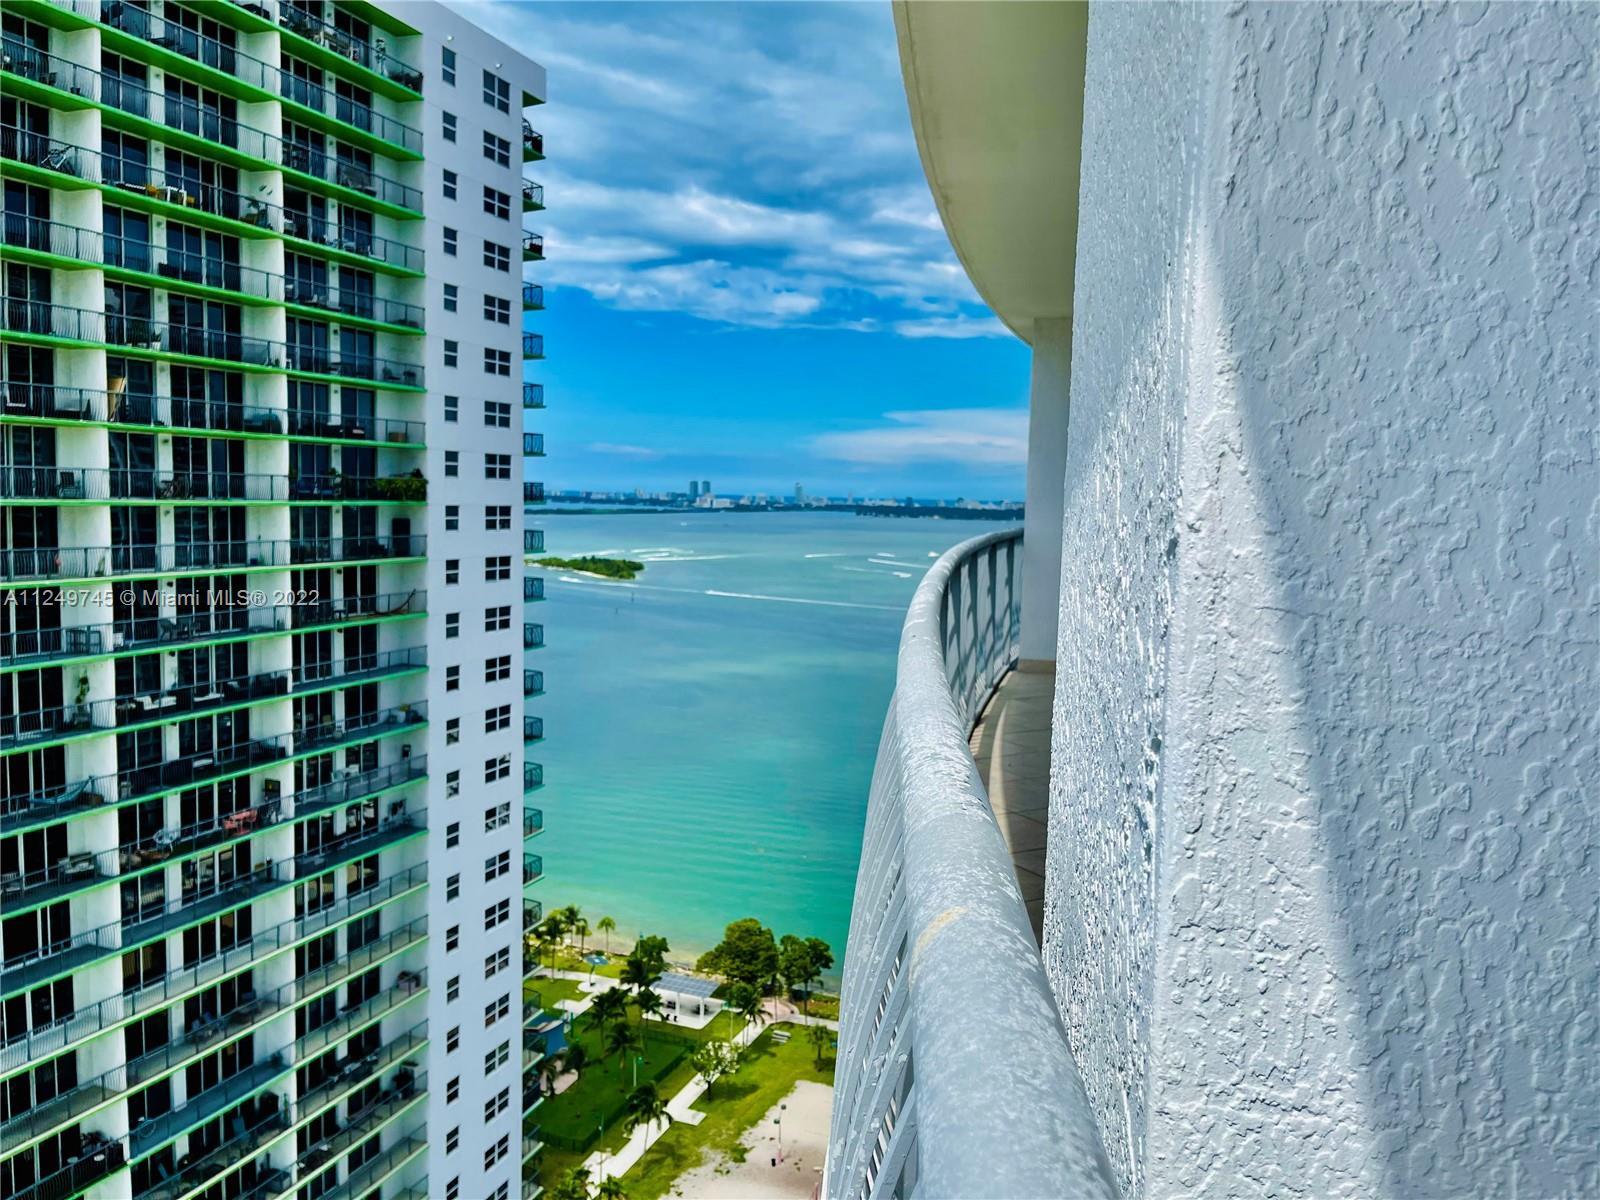 Located at EDGEWATER, AIRBNB is allowed with a minimum of 30 days! Great for investors!
Bright and 